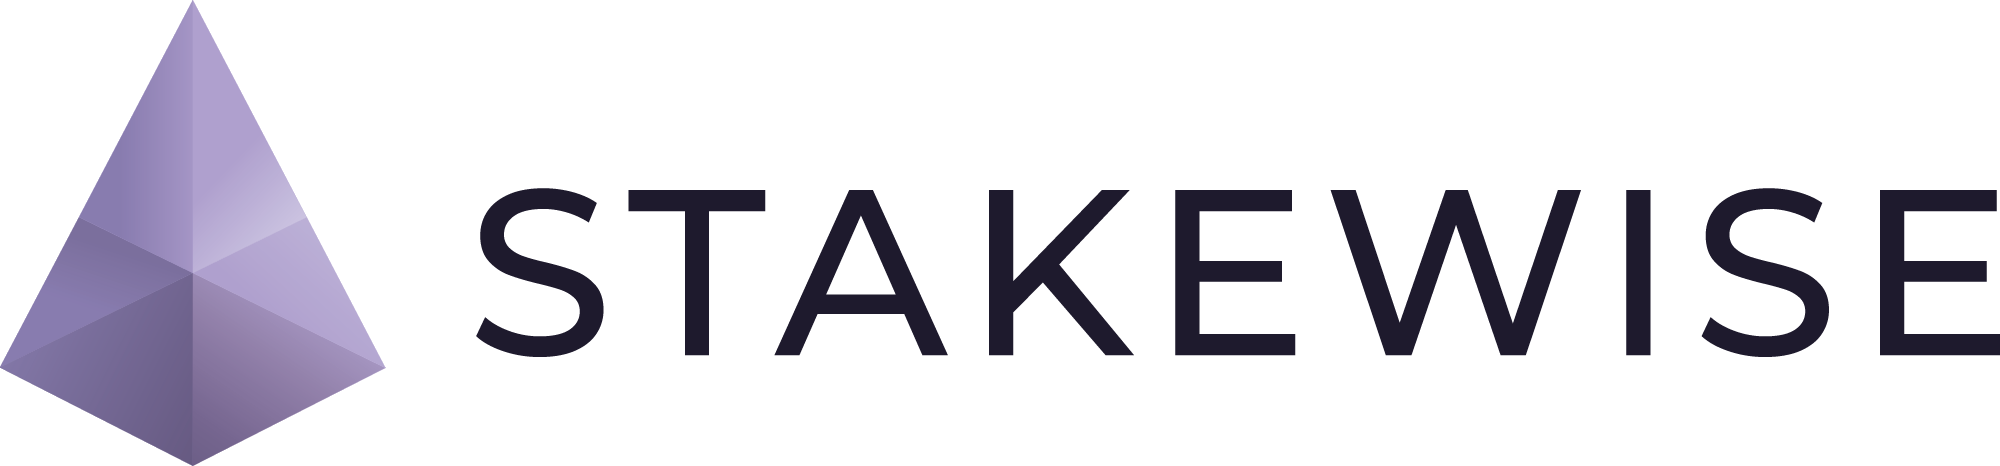 Stakewise